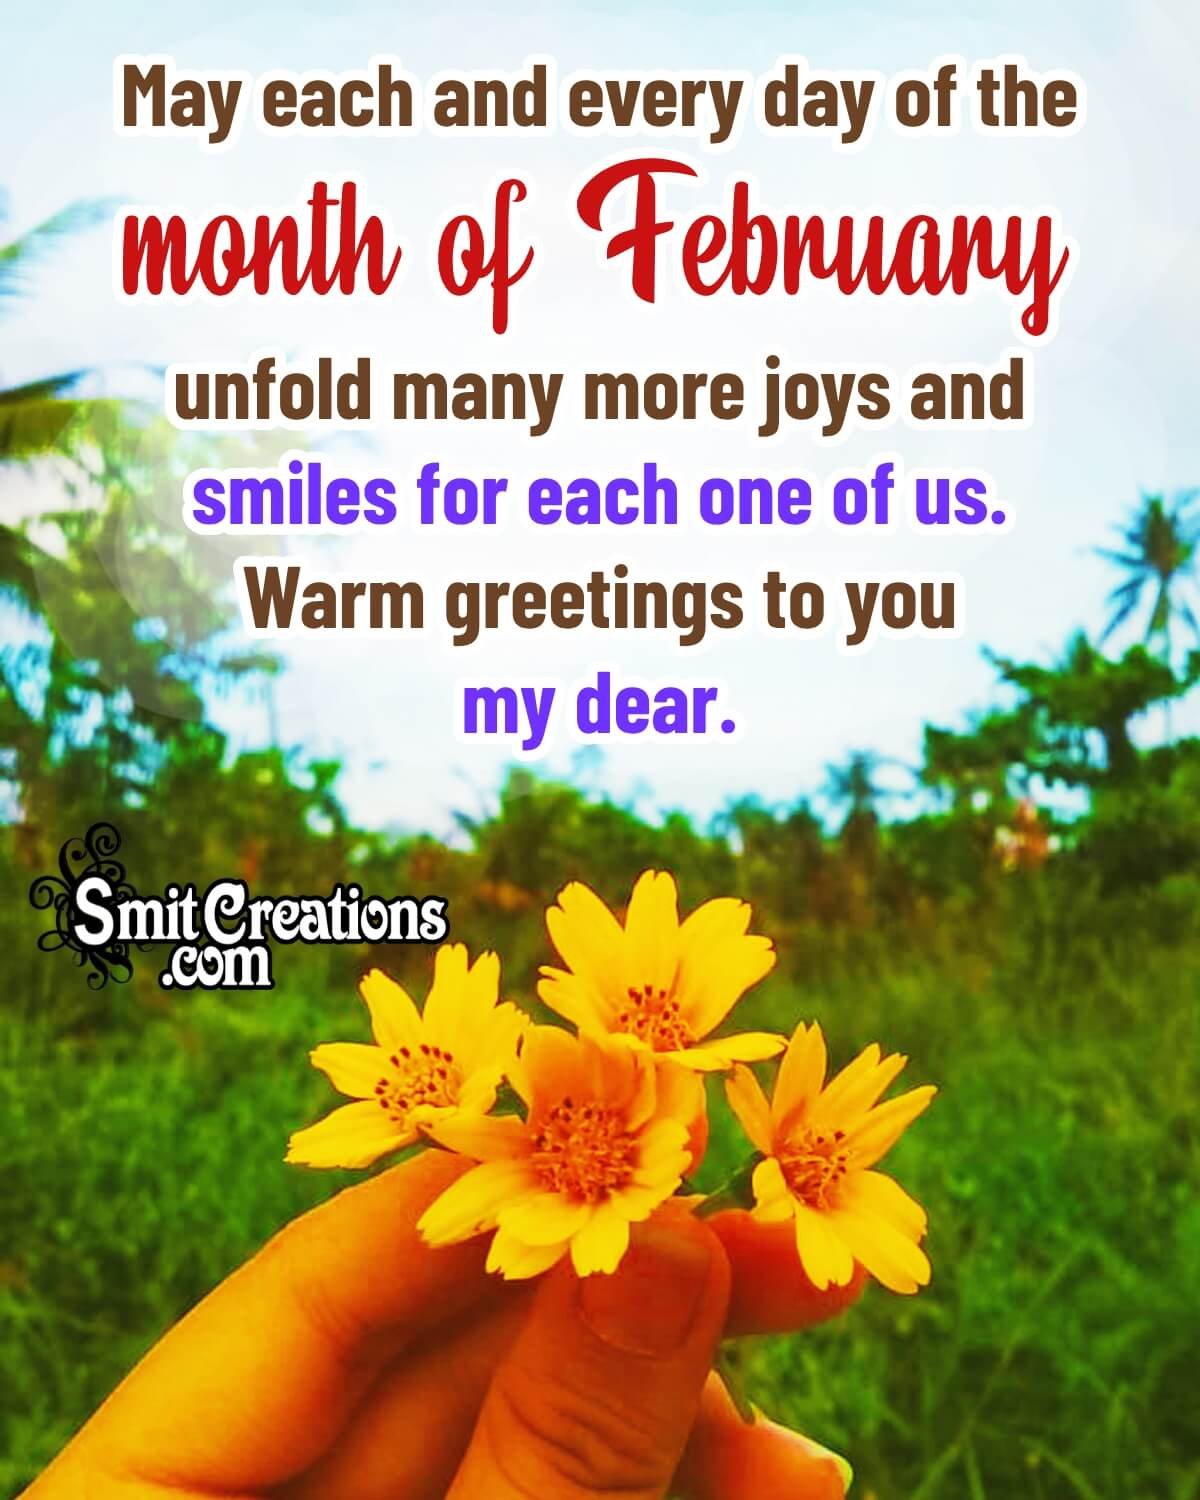 Warm Greetings For February Month